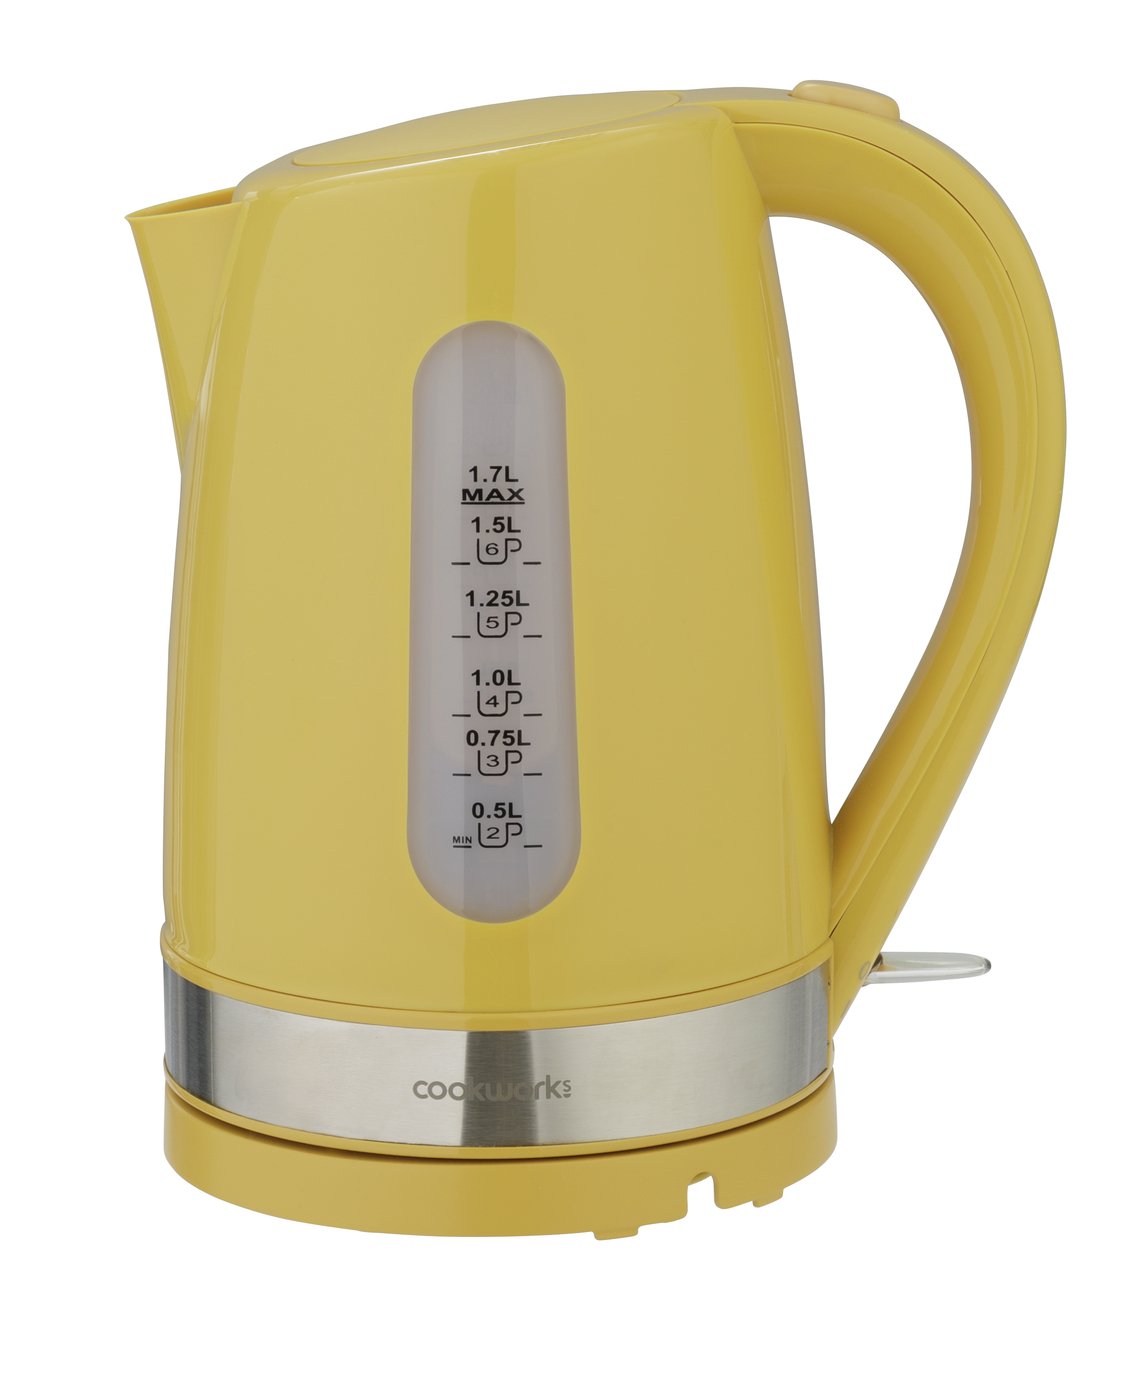 Cookworks Illuminated Kettle Review